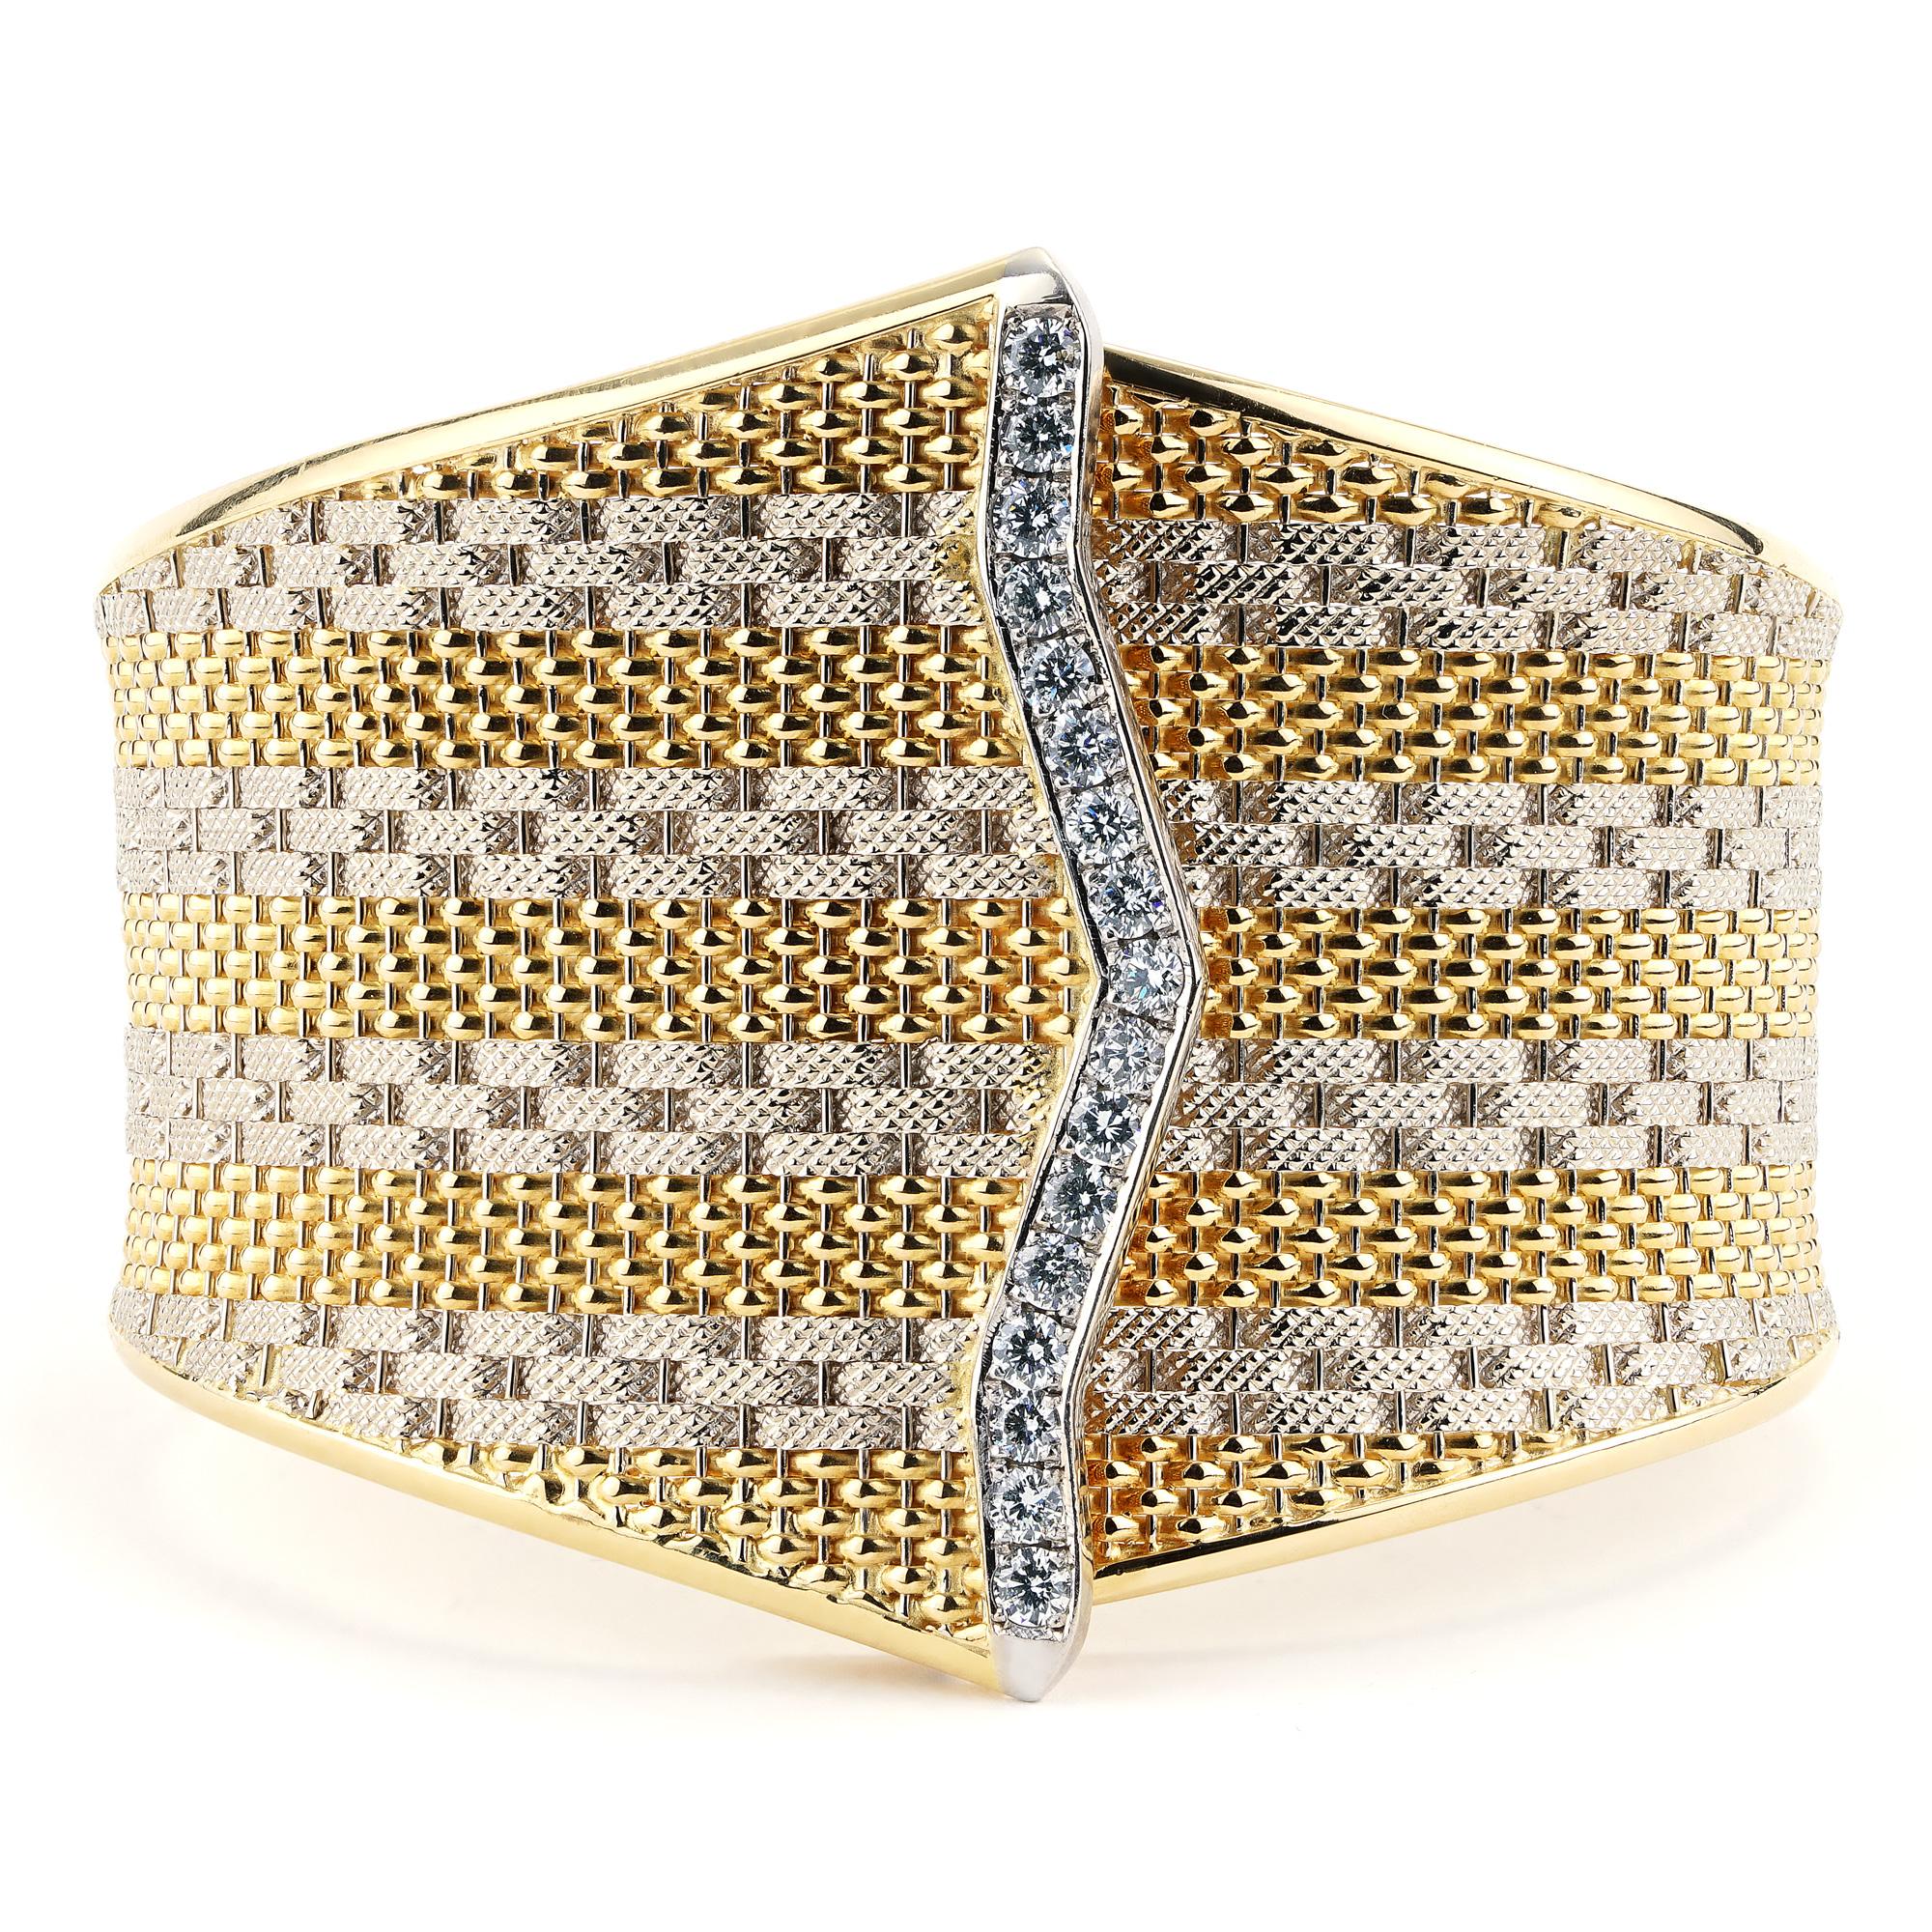 Elegance meets sophistication in this exquisite two-tone diamond bangle bracelet. Crafted from luxurious 18 karat yellow and white gold, this bracelet showcases a harmonious blend of warm and cool tones, adding a timeless appeal to any ensemble.

At